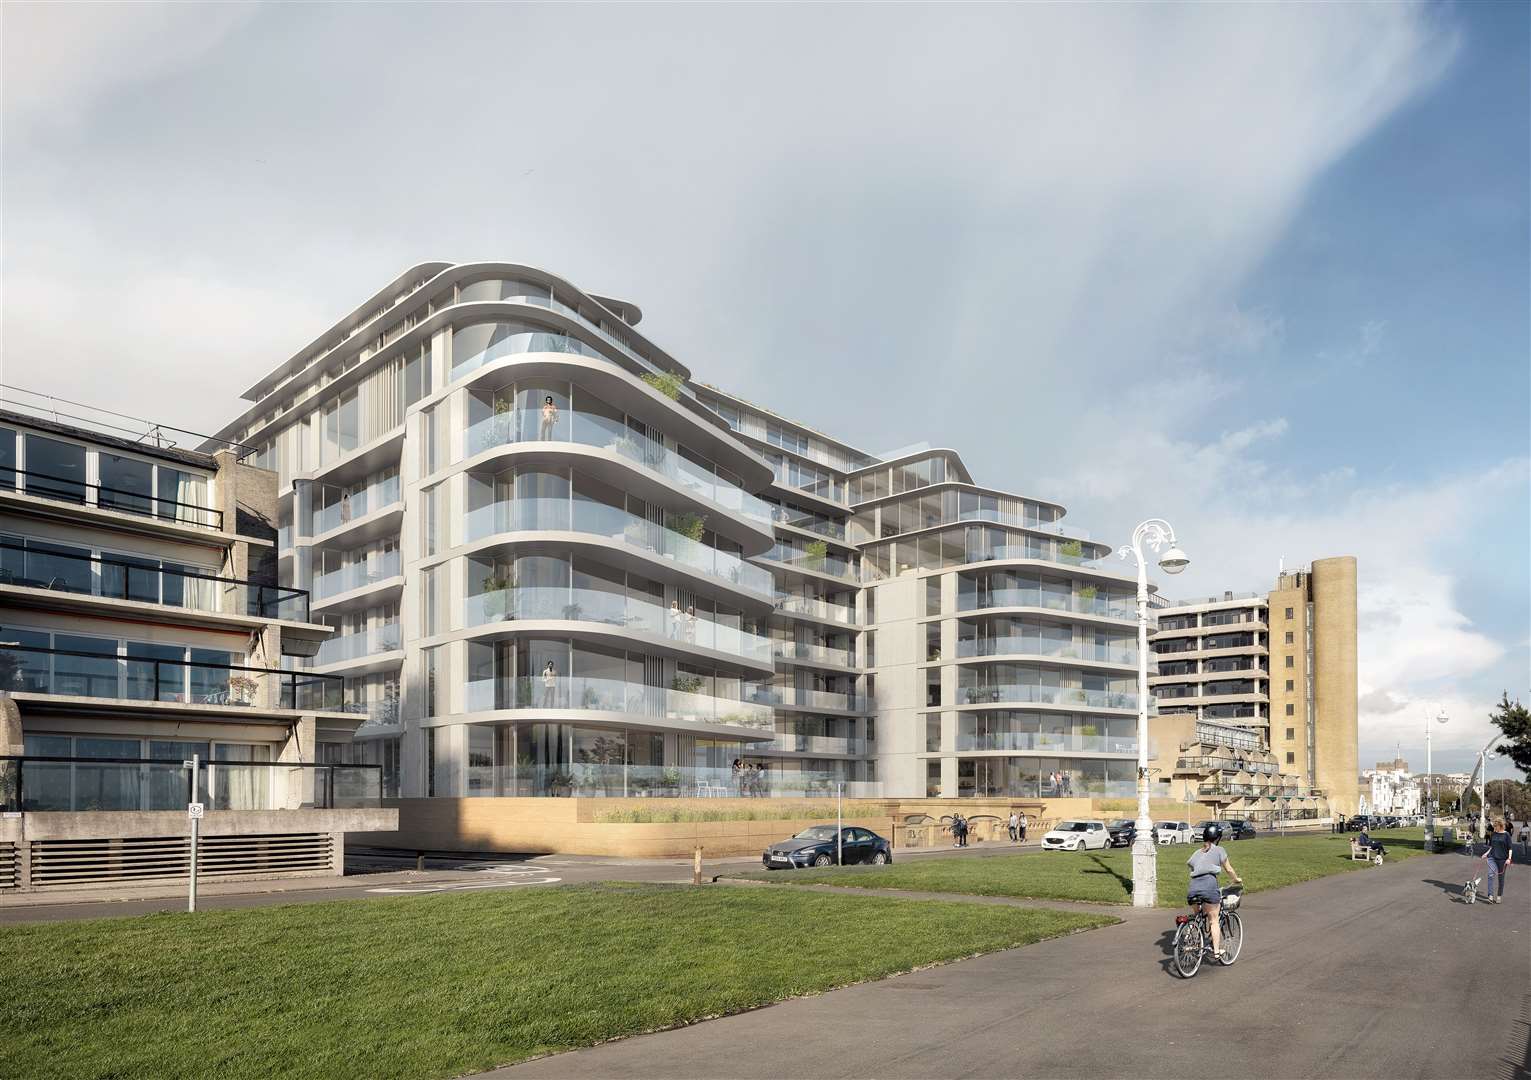 91 flats are proposed, and the Leas Pavilion is to be returned to its former glory